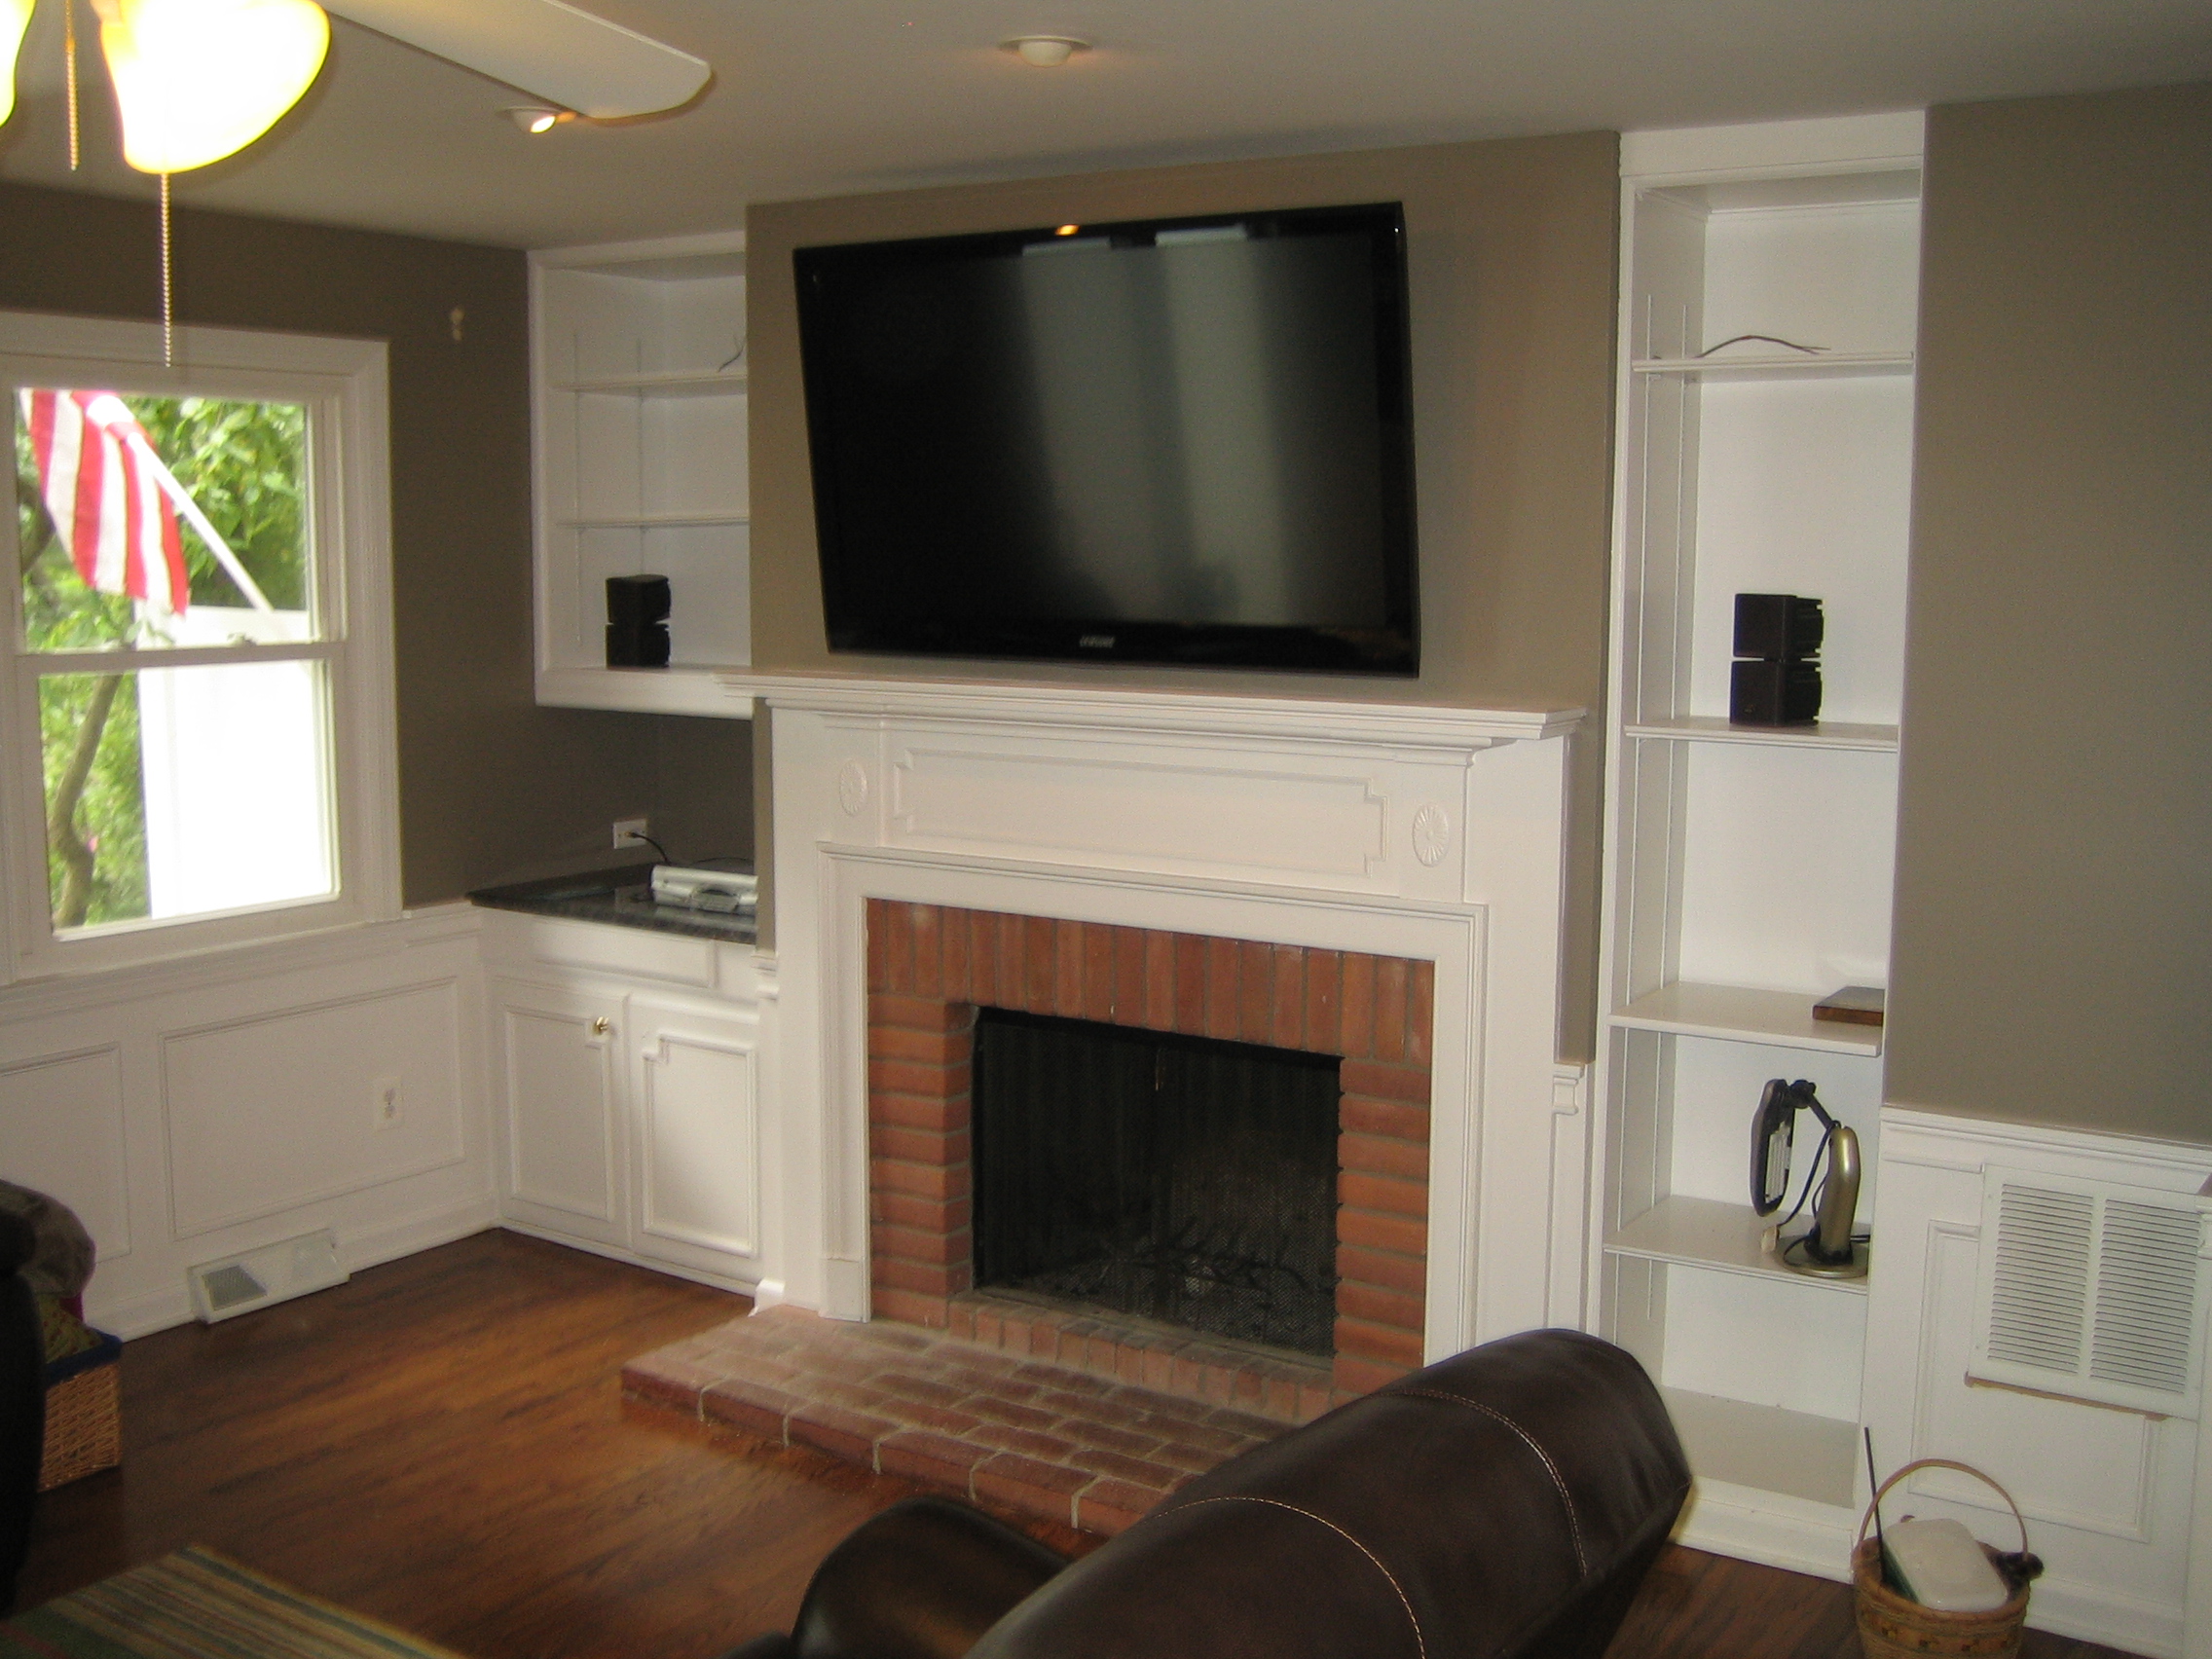 How to Mount Tv Above Fireplace Fresh Installing Tv Above Fireplace Charming Fireplace